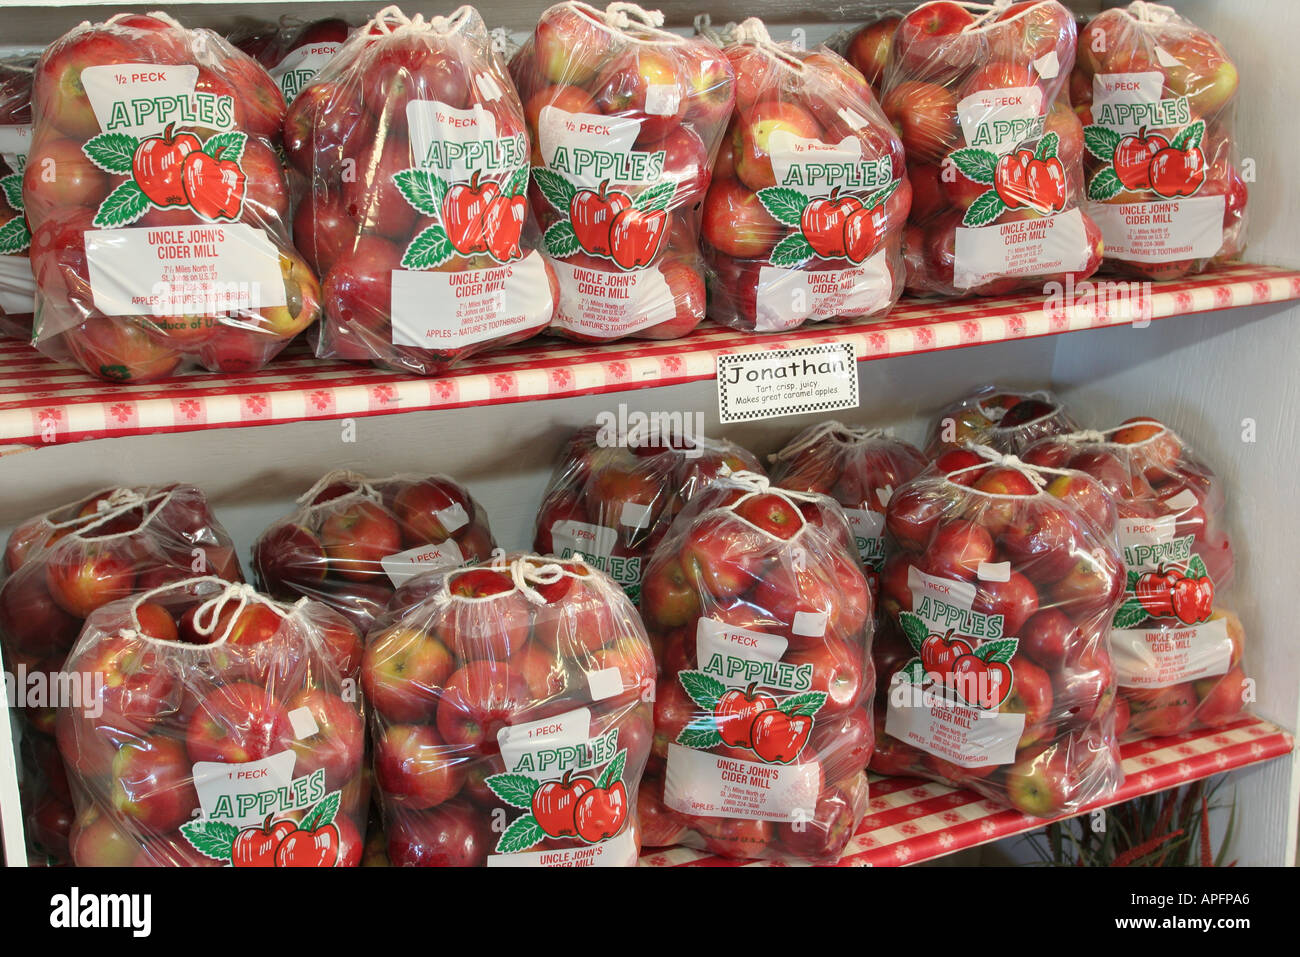 Michigan St. Johns,Uncle John's Cider Mill,apples for sale,peck,clear plastic bags,Jonathan,MI051018066 Stock Photo